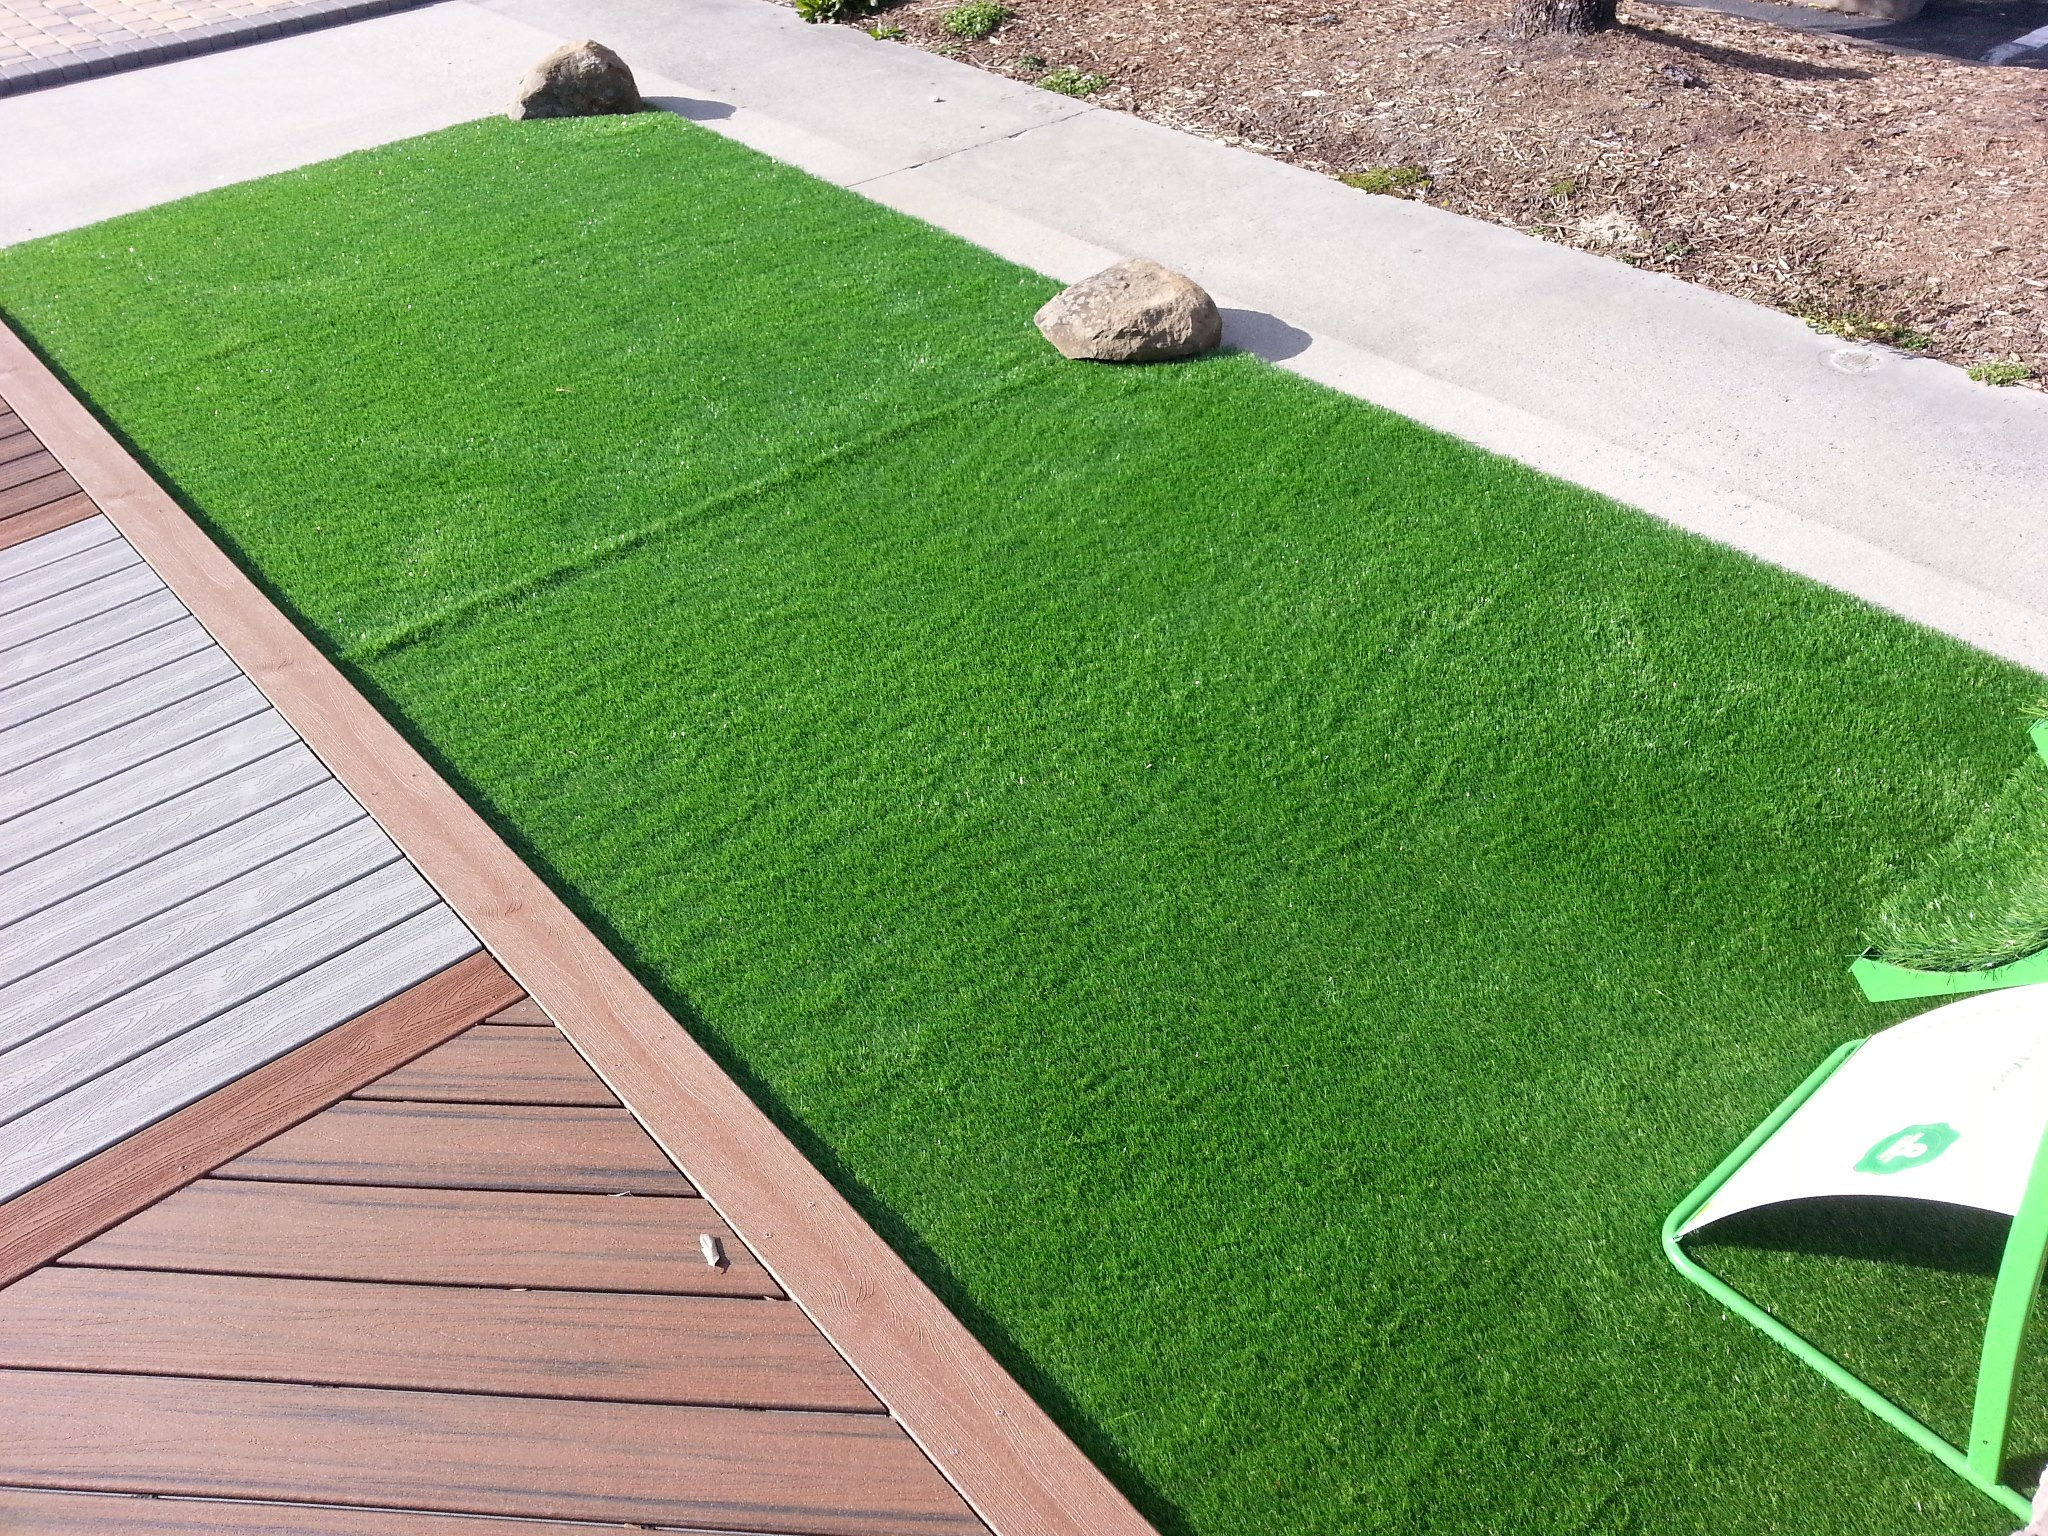 Who Should Consider Installing Artificial Grass Suffolk?